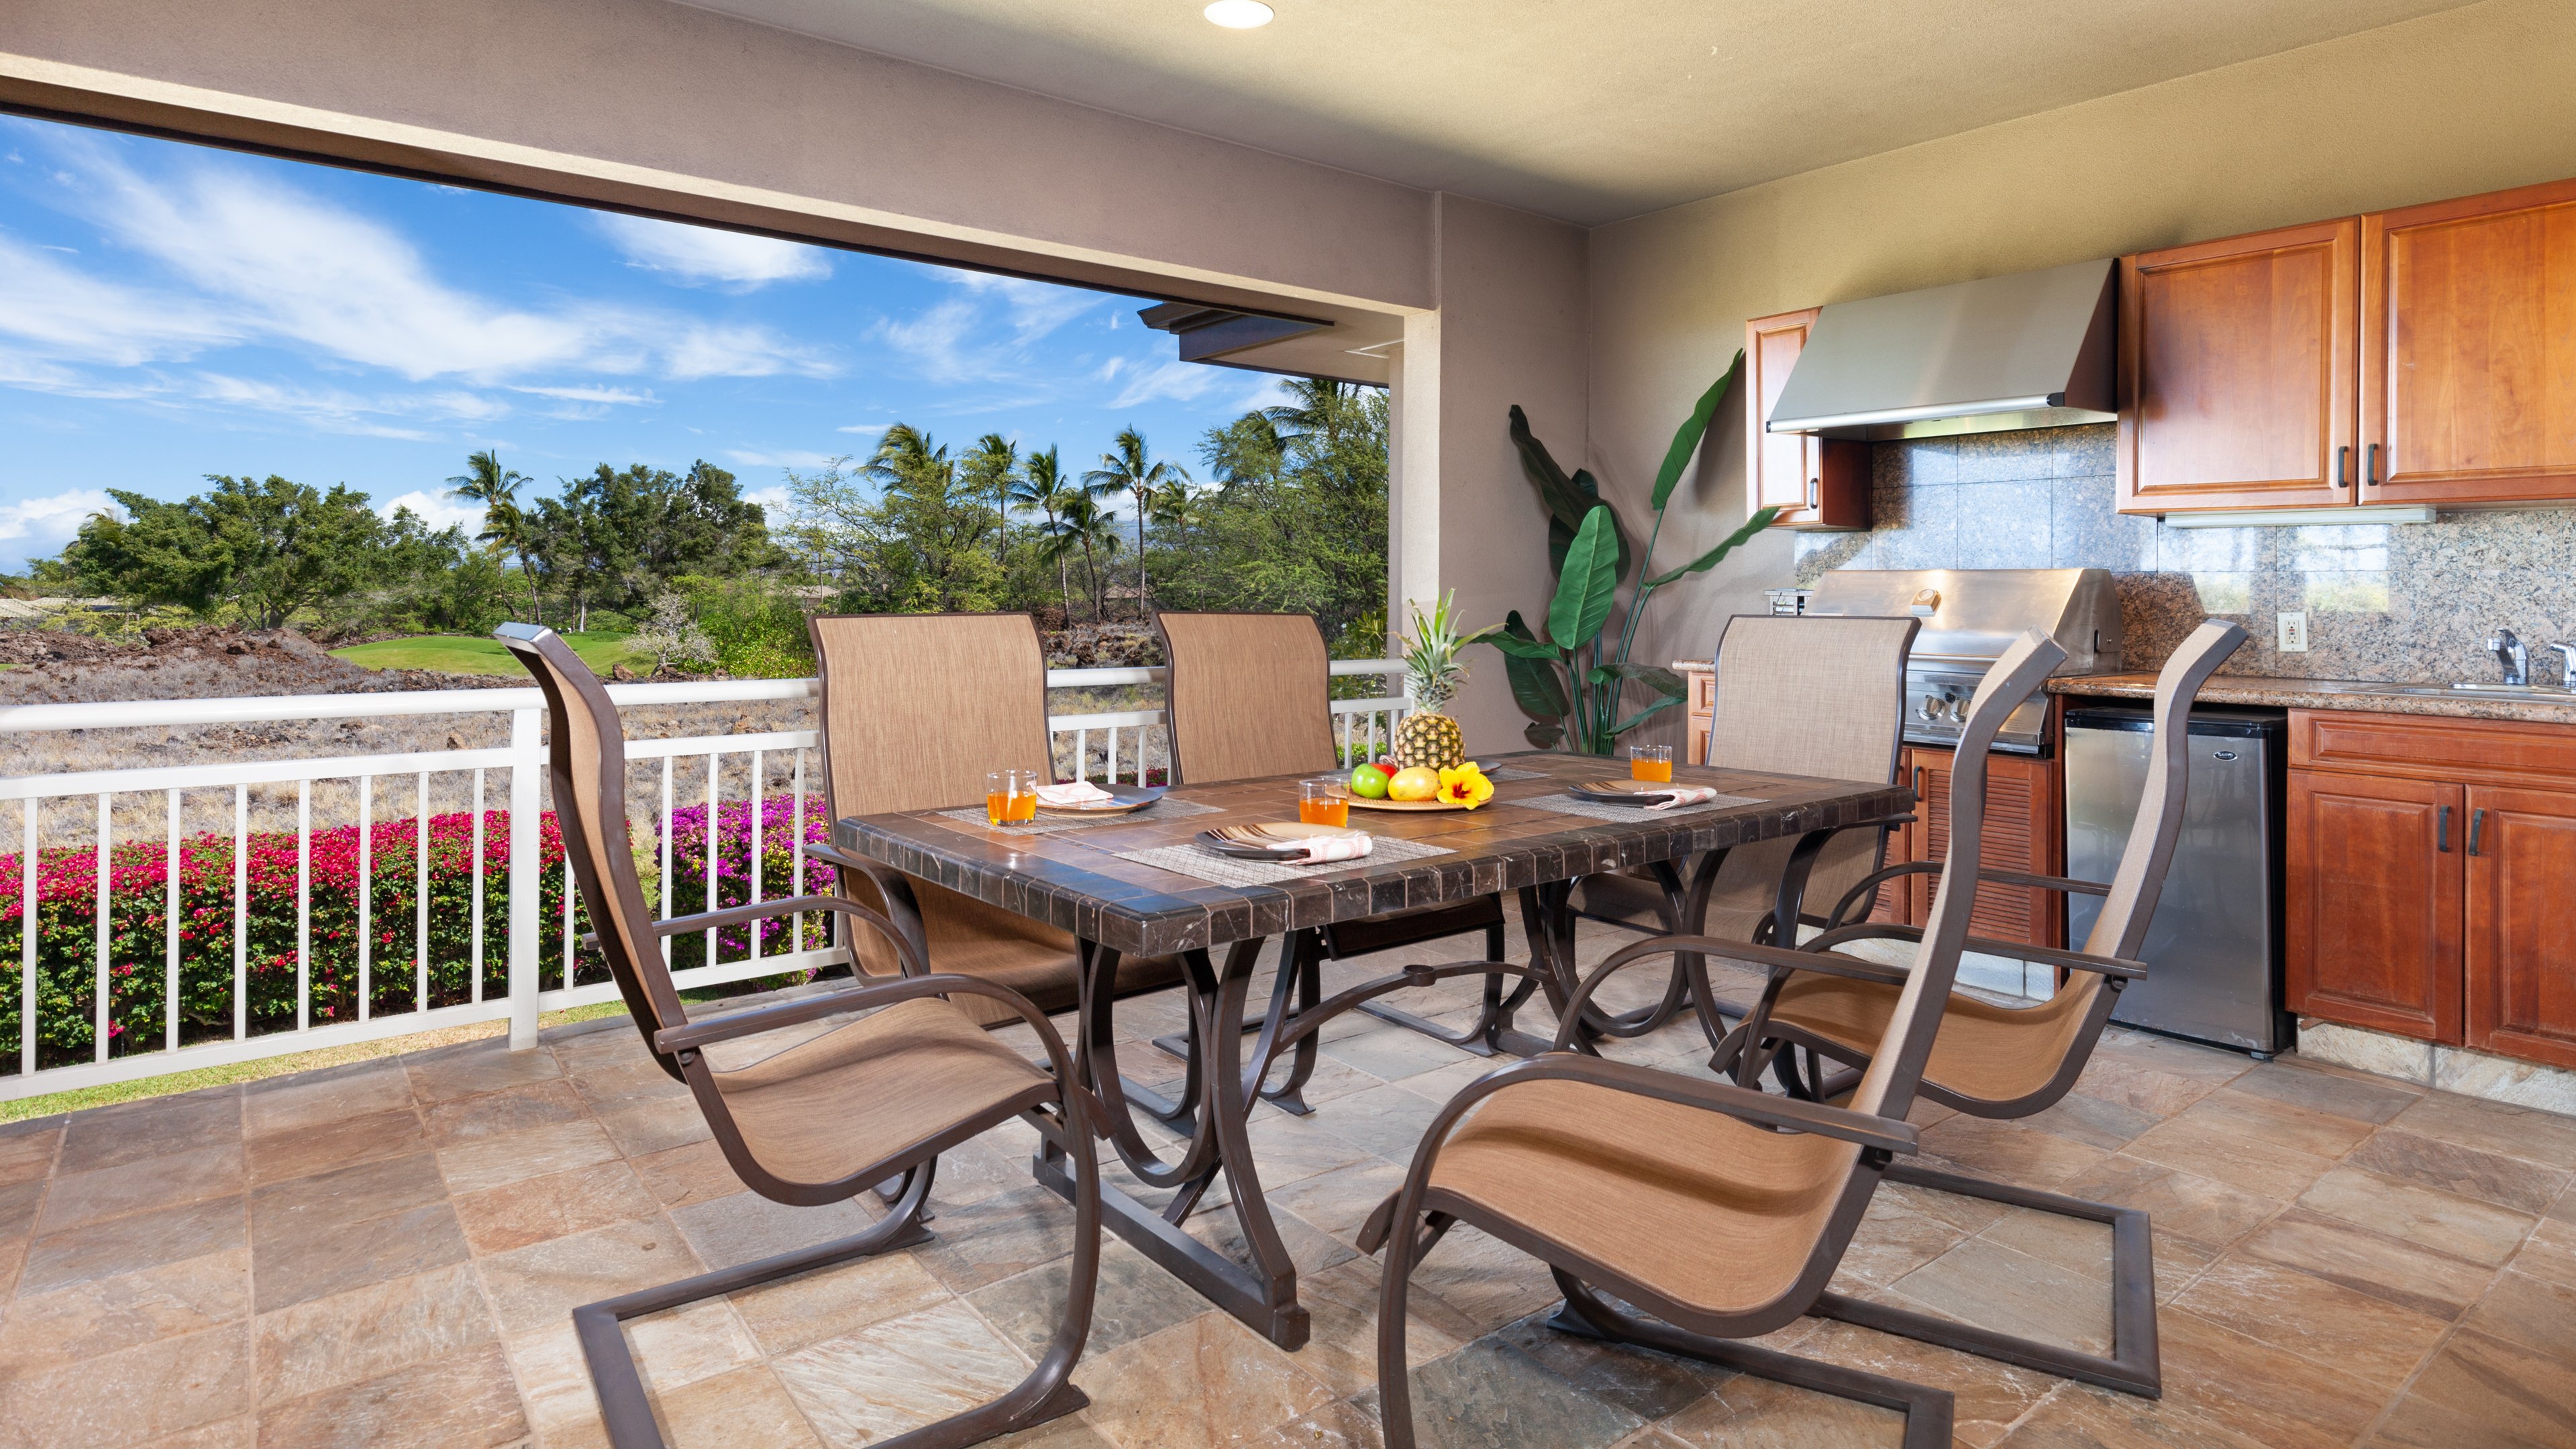 Large covered lanai overlooking golf course with high-end grill